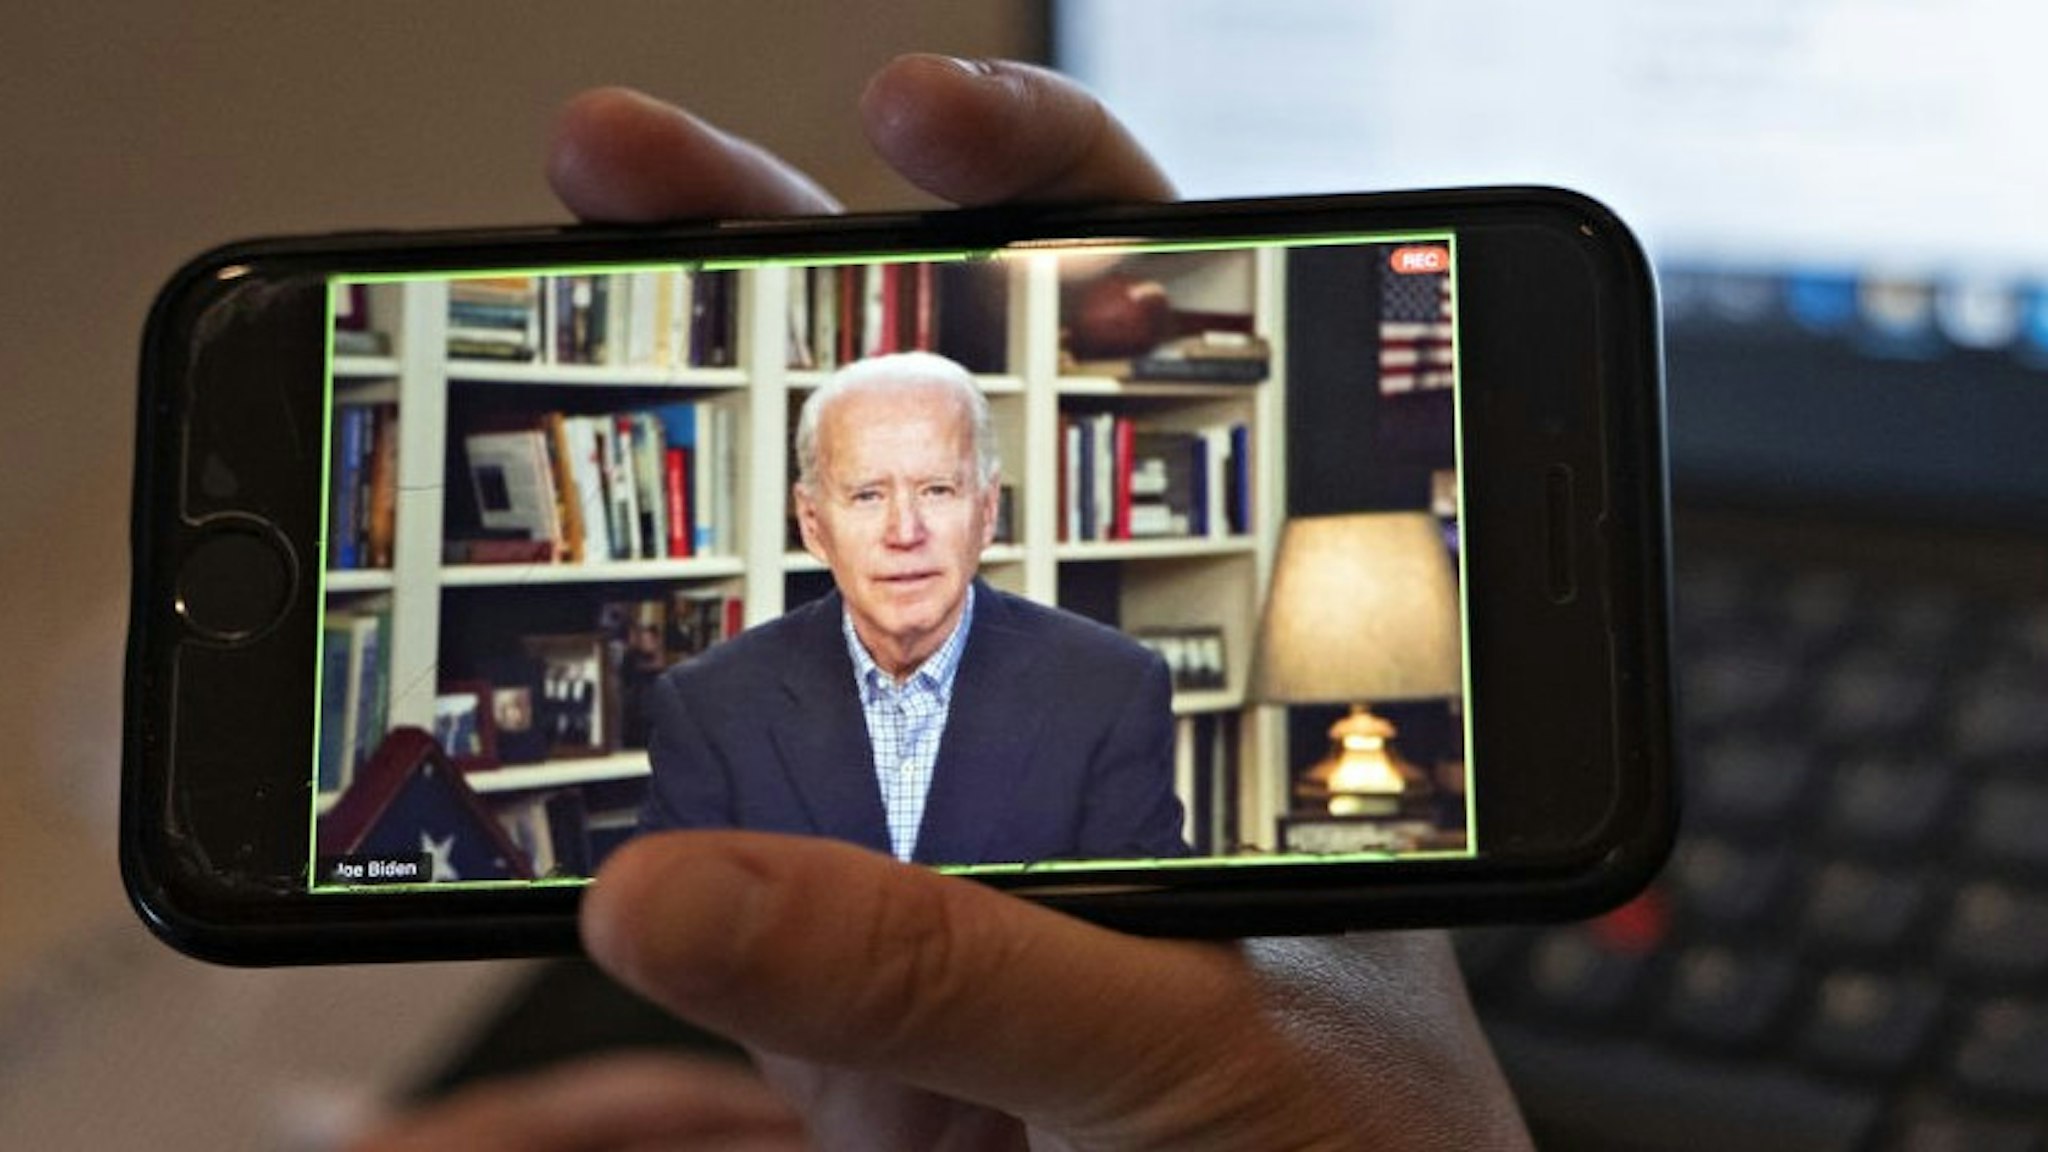 Former Vice President Joe Biden, 2020 Democratic presidential candidate, speaks during a virtual press briefing on a smartphone in this arranged photograph in Arlington, Virginia, U.S., on Wednesday, March 25, 2020. During the livestreamed news conference today, Biden said he didn't see the need for another debate, which the Democratic National Committee had previously said would happen sometime in April. Photographer: